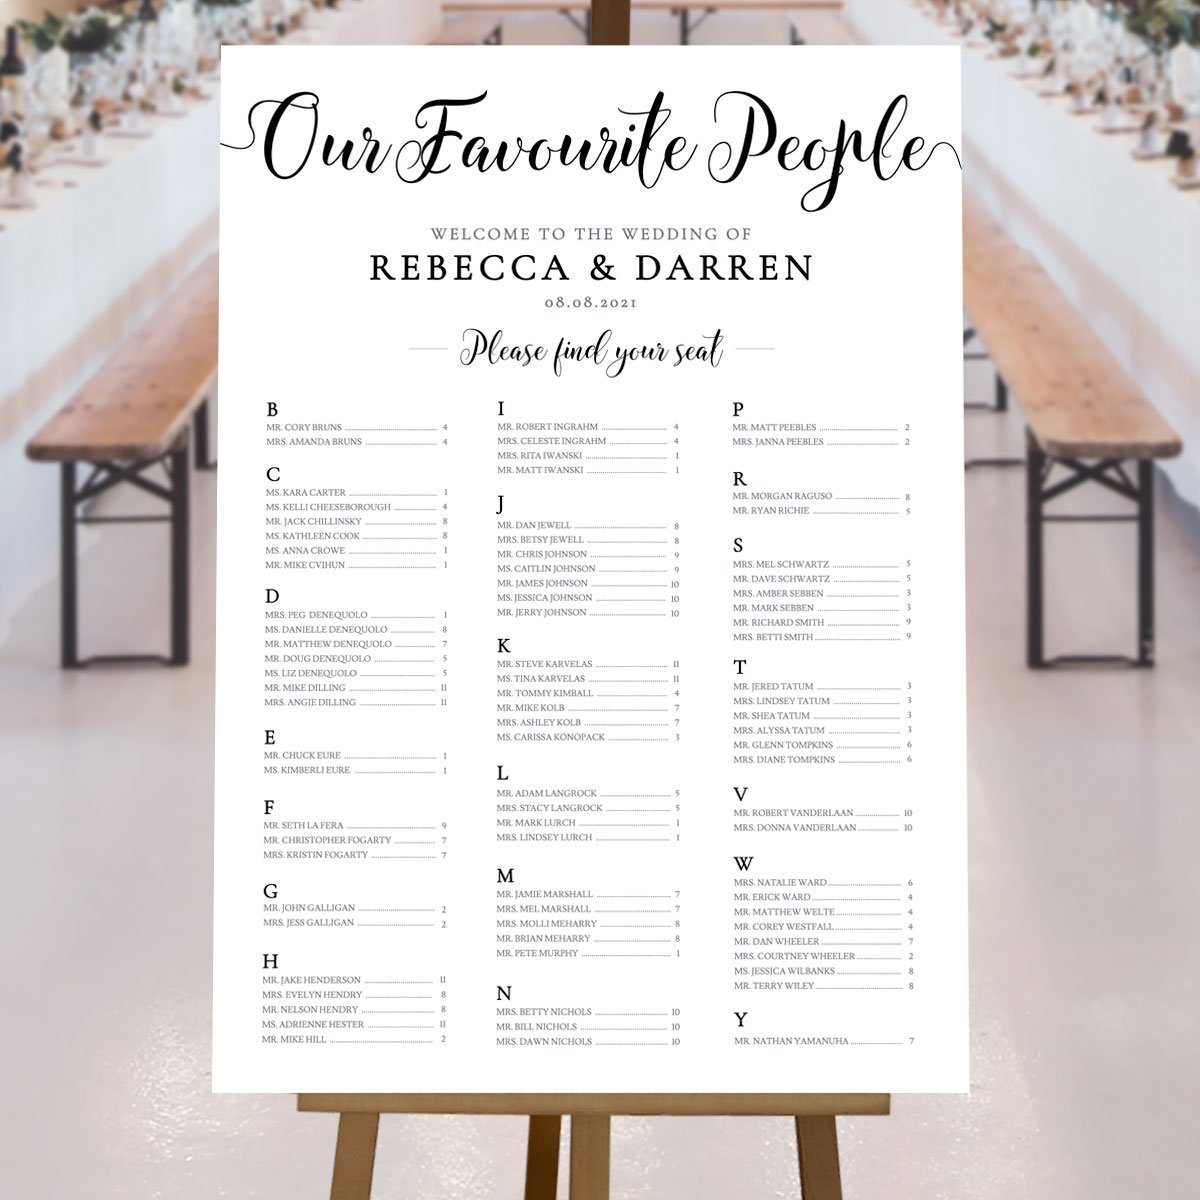 our favorite people black_a-z seating plan at rustic marquee wedding reception